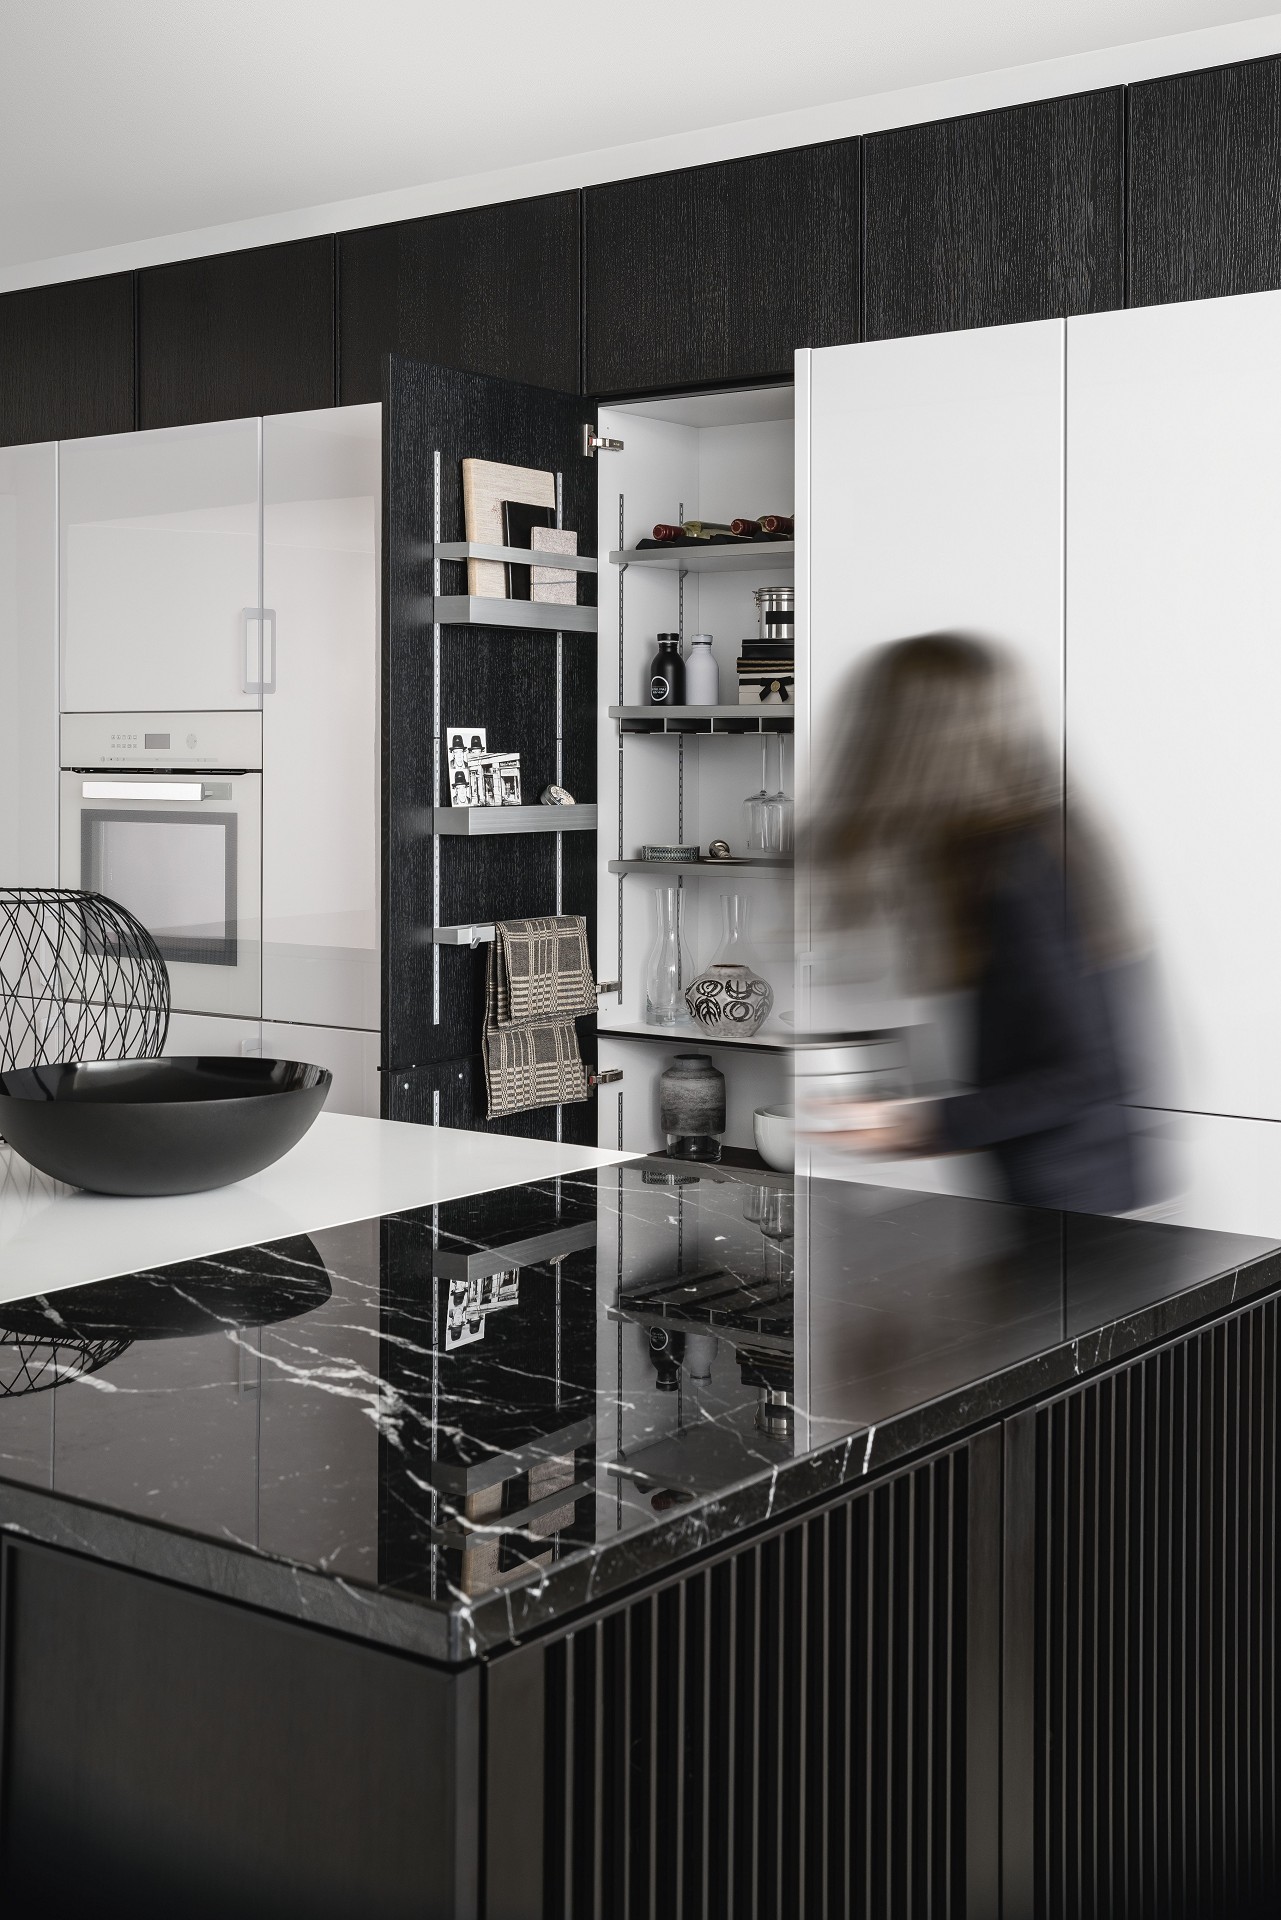 SieMatic Pure SE 3003 R kitchen cabinets in black matte oak with SieMatic MultiMatic interior organization system